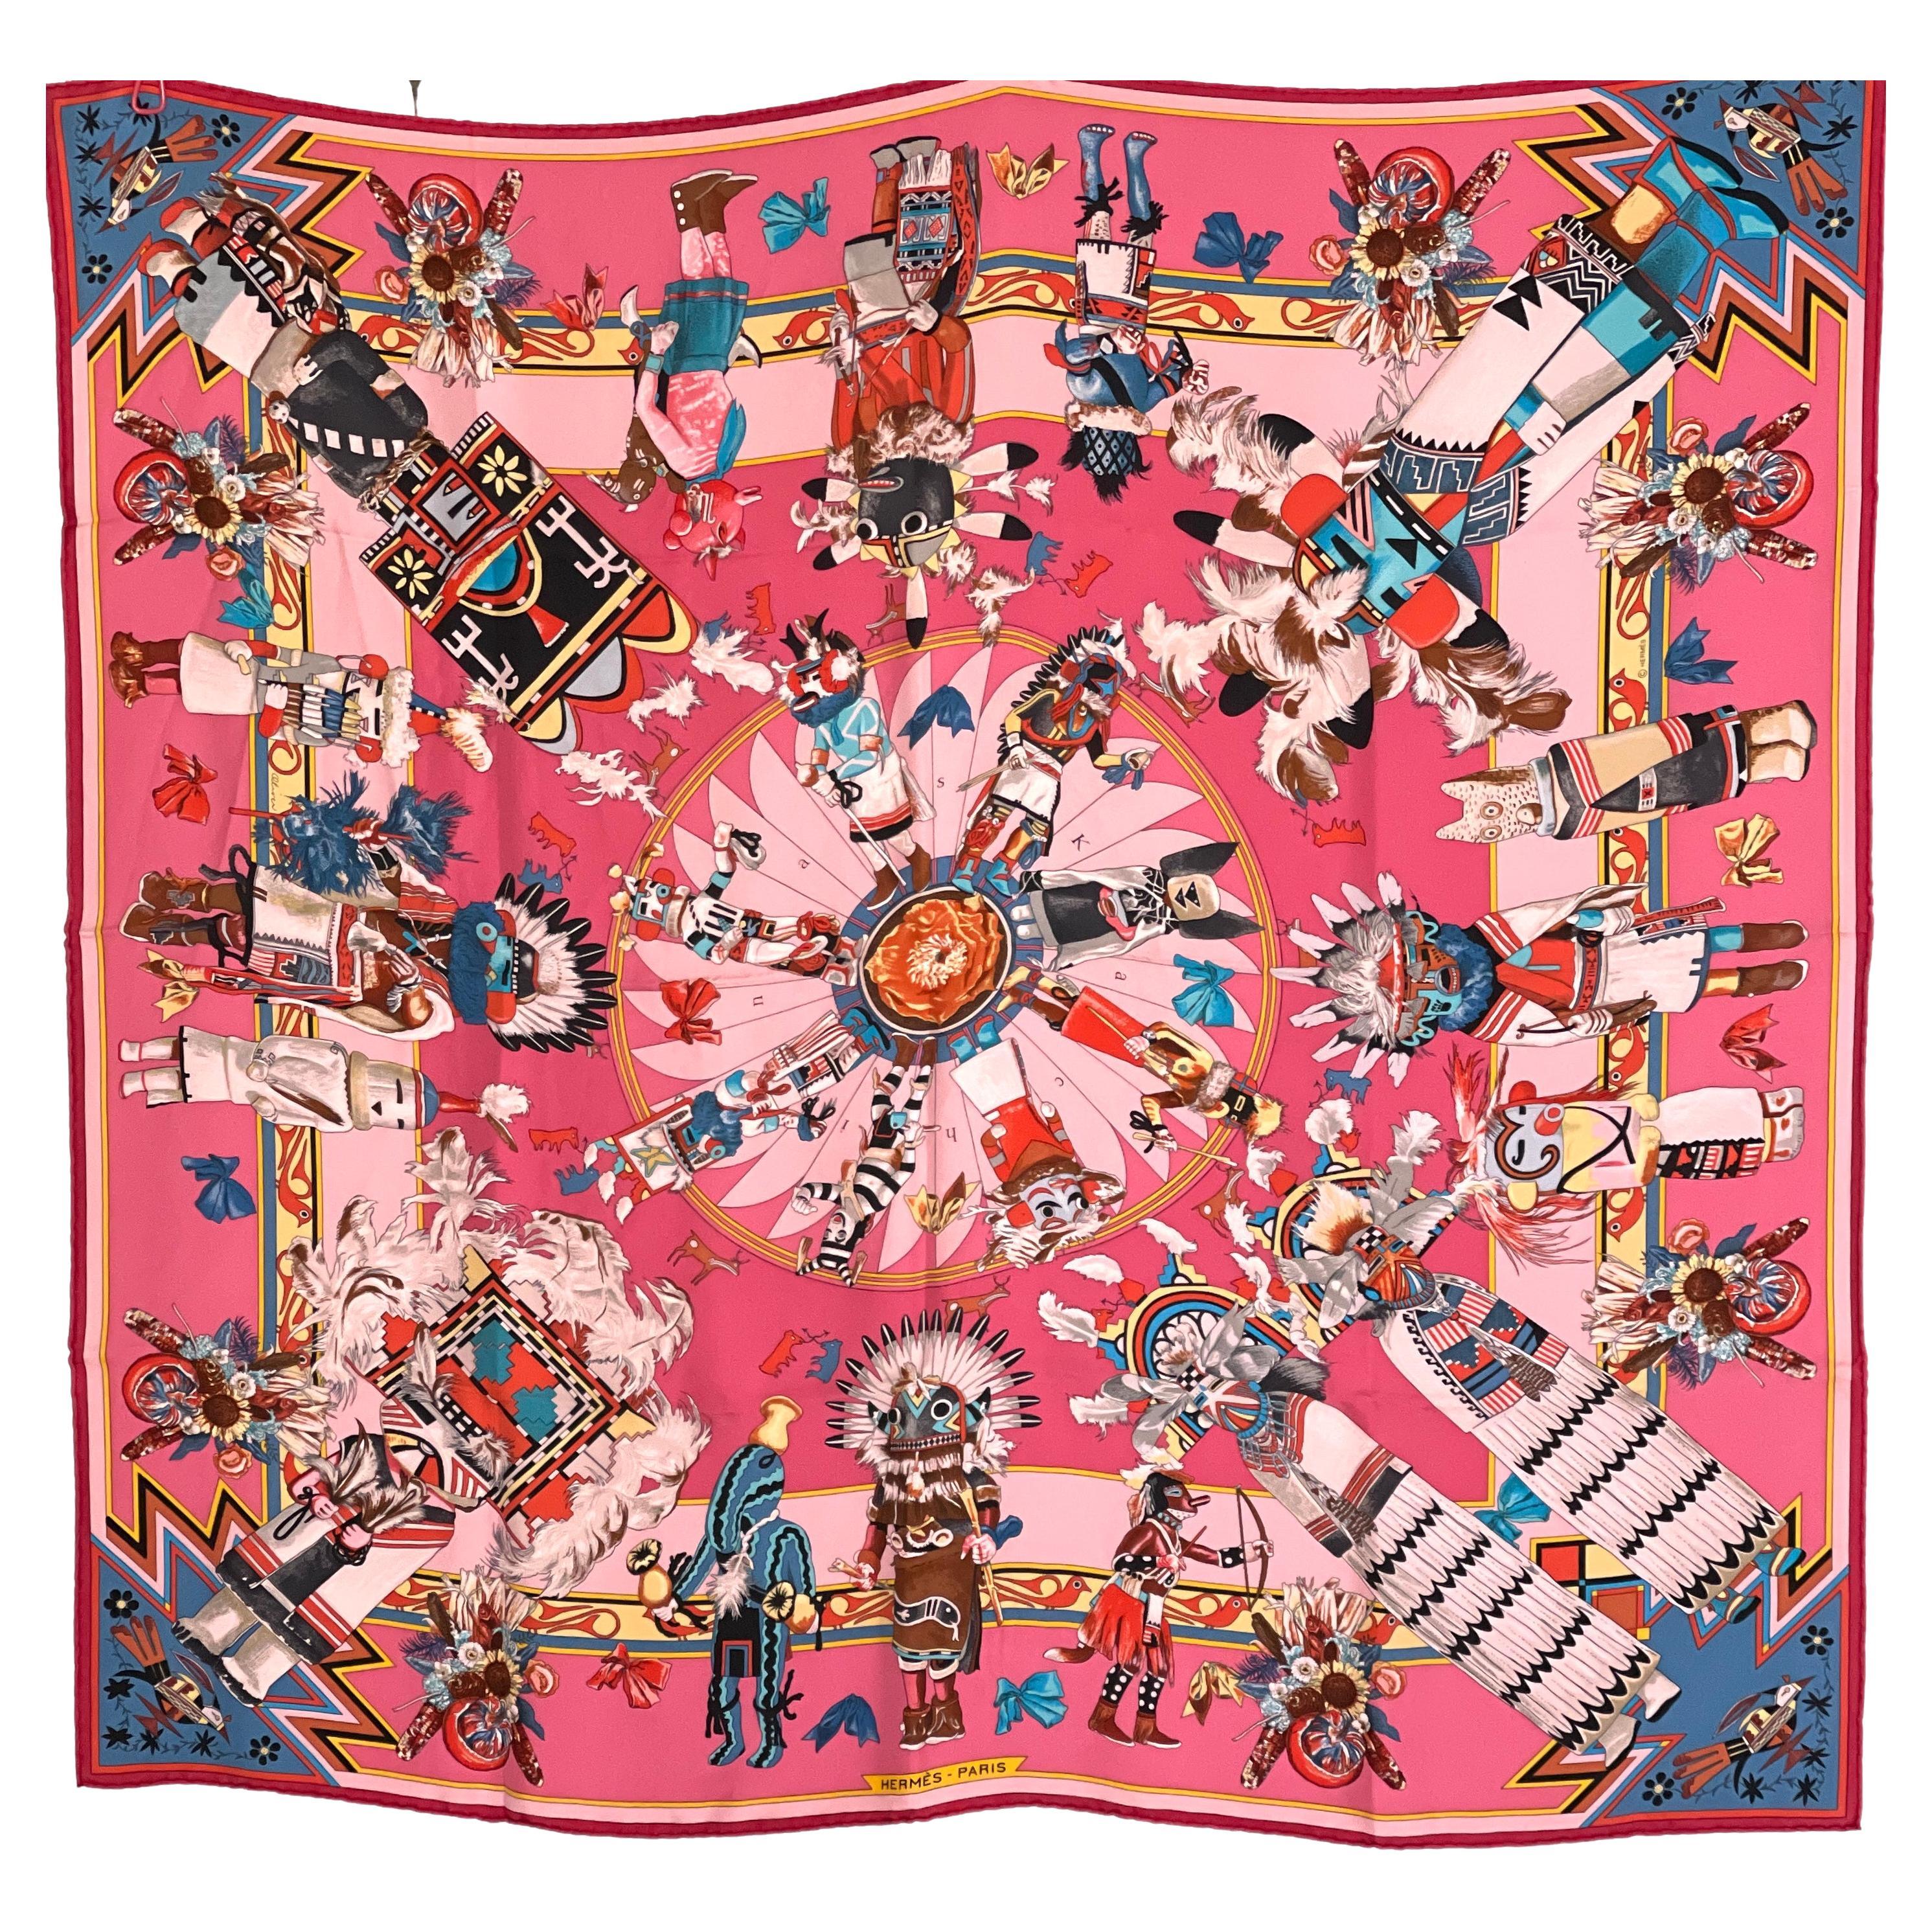 Hermes Scarf Kachinas New Washed Silk Kermit Oliver Pink Blue Corail